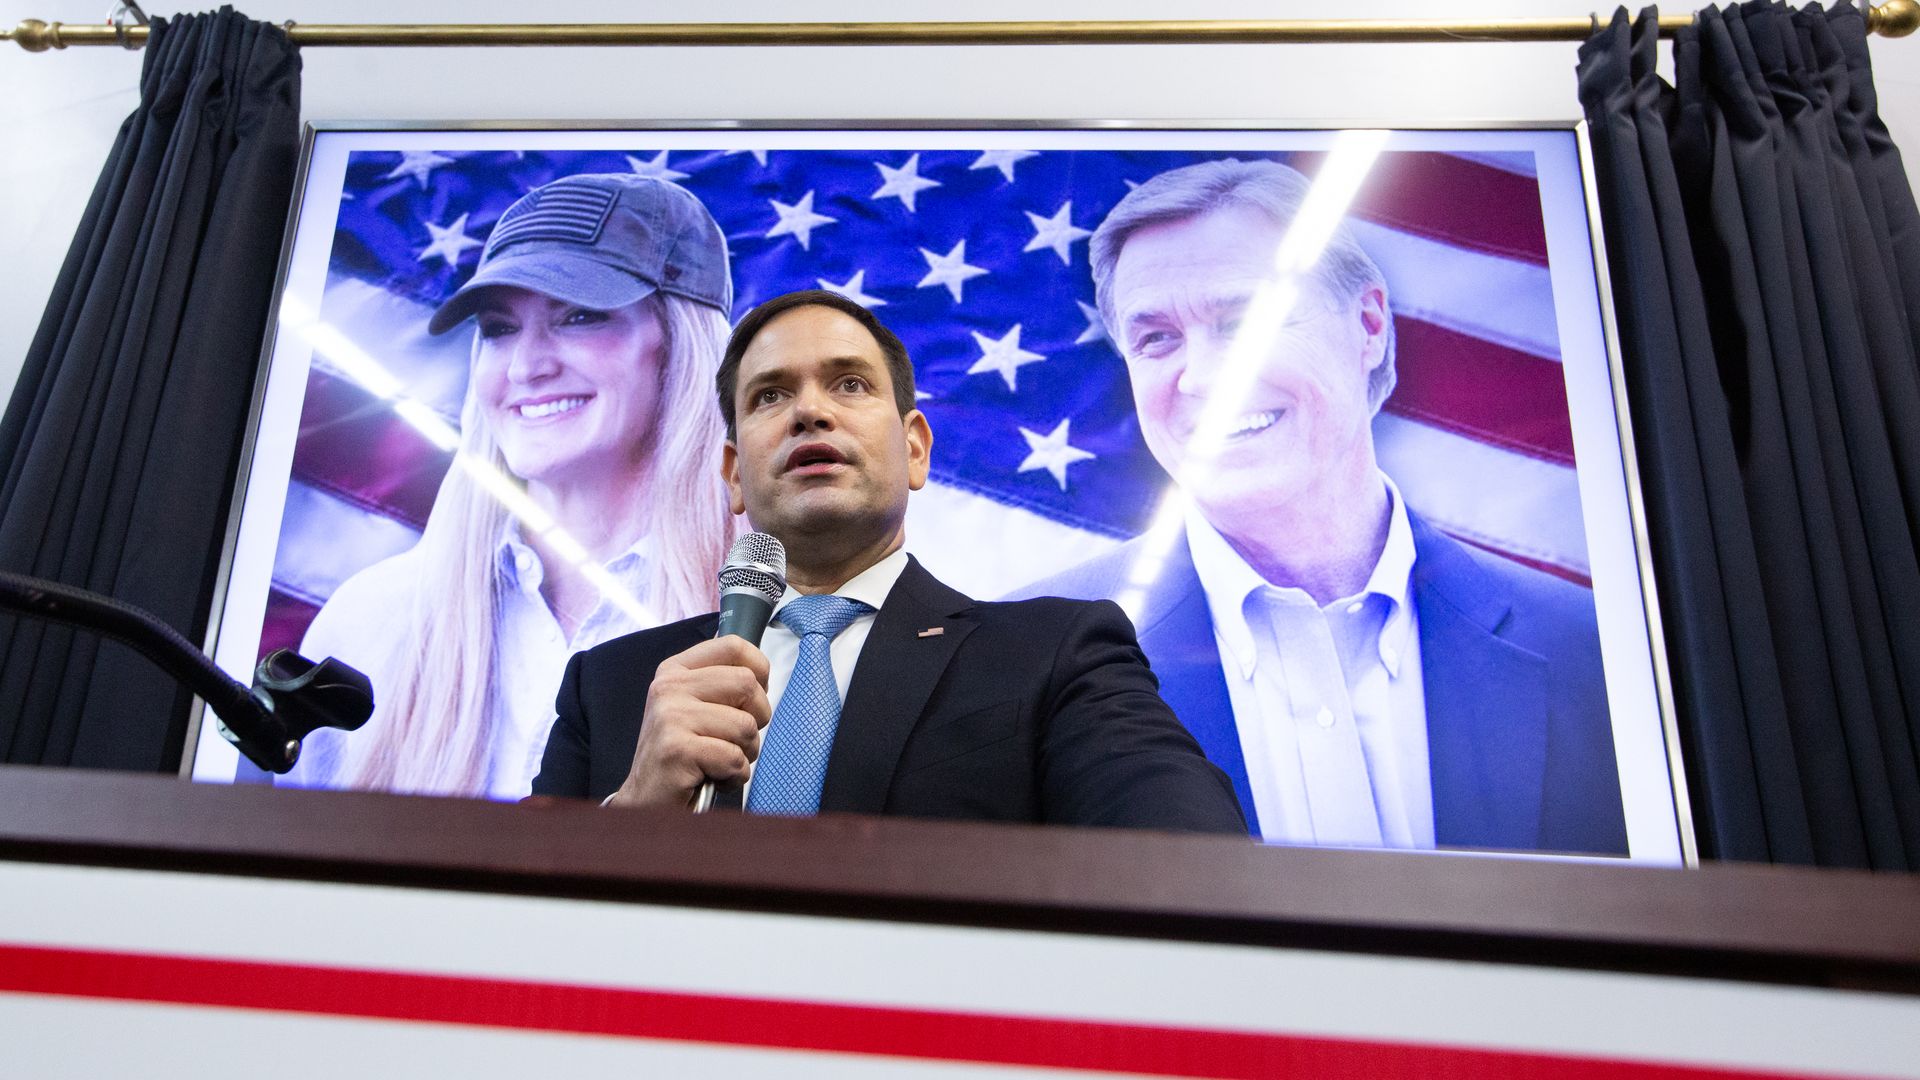 Marco Rubio campaigning for Kelly Loeffler and David Perdue